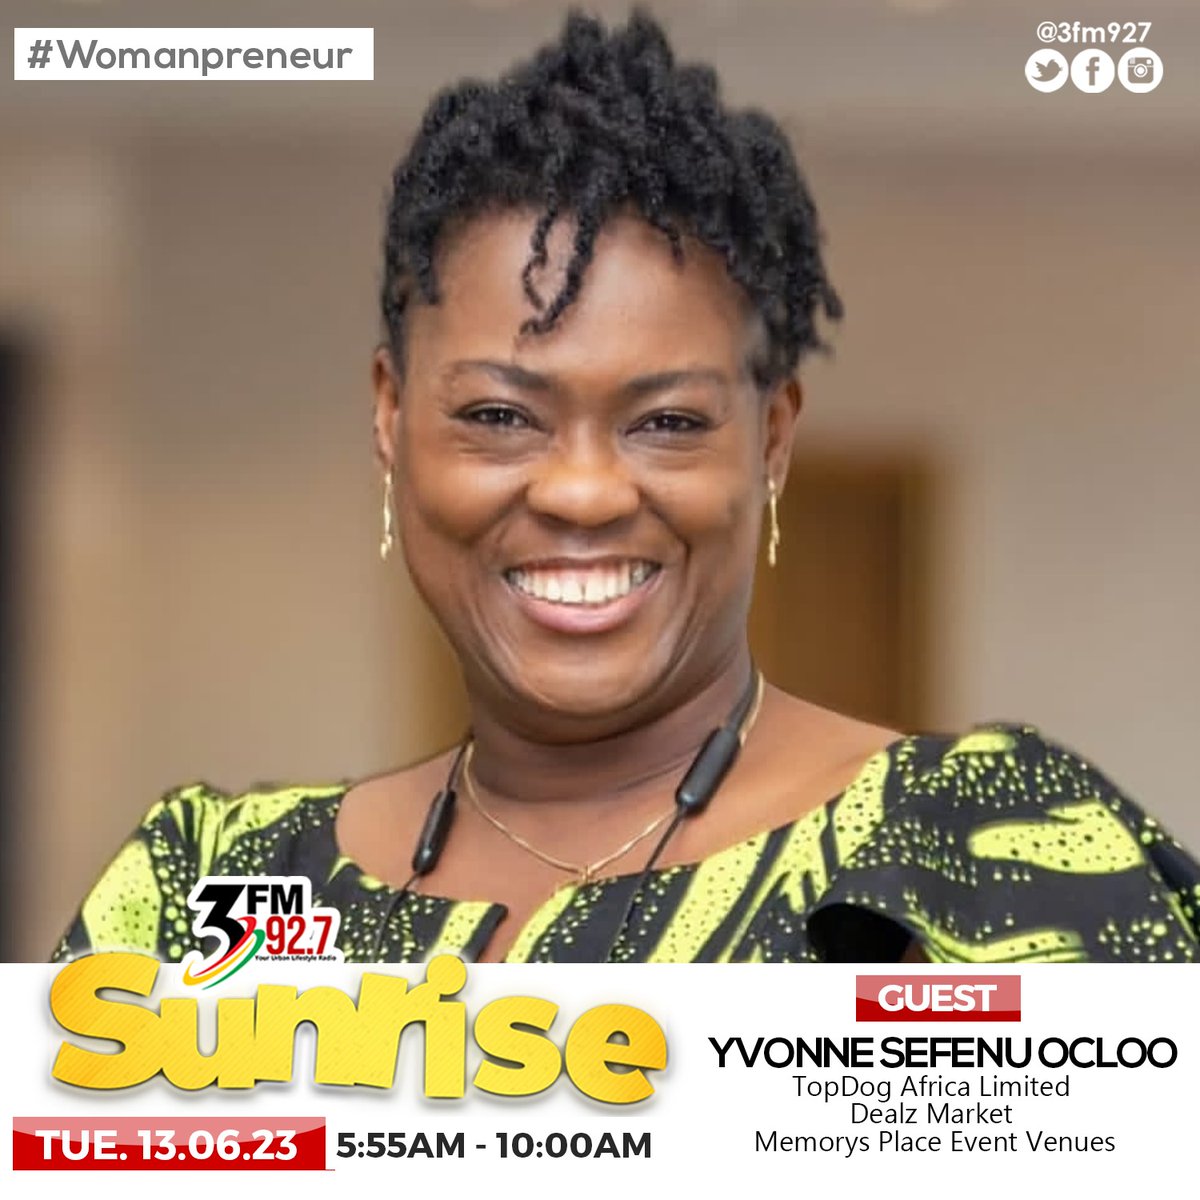 Today on Womanpreneur, Yvonne Sefenu Ocloo will be our guest at 9:30 am. #3FMSunrise